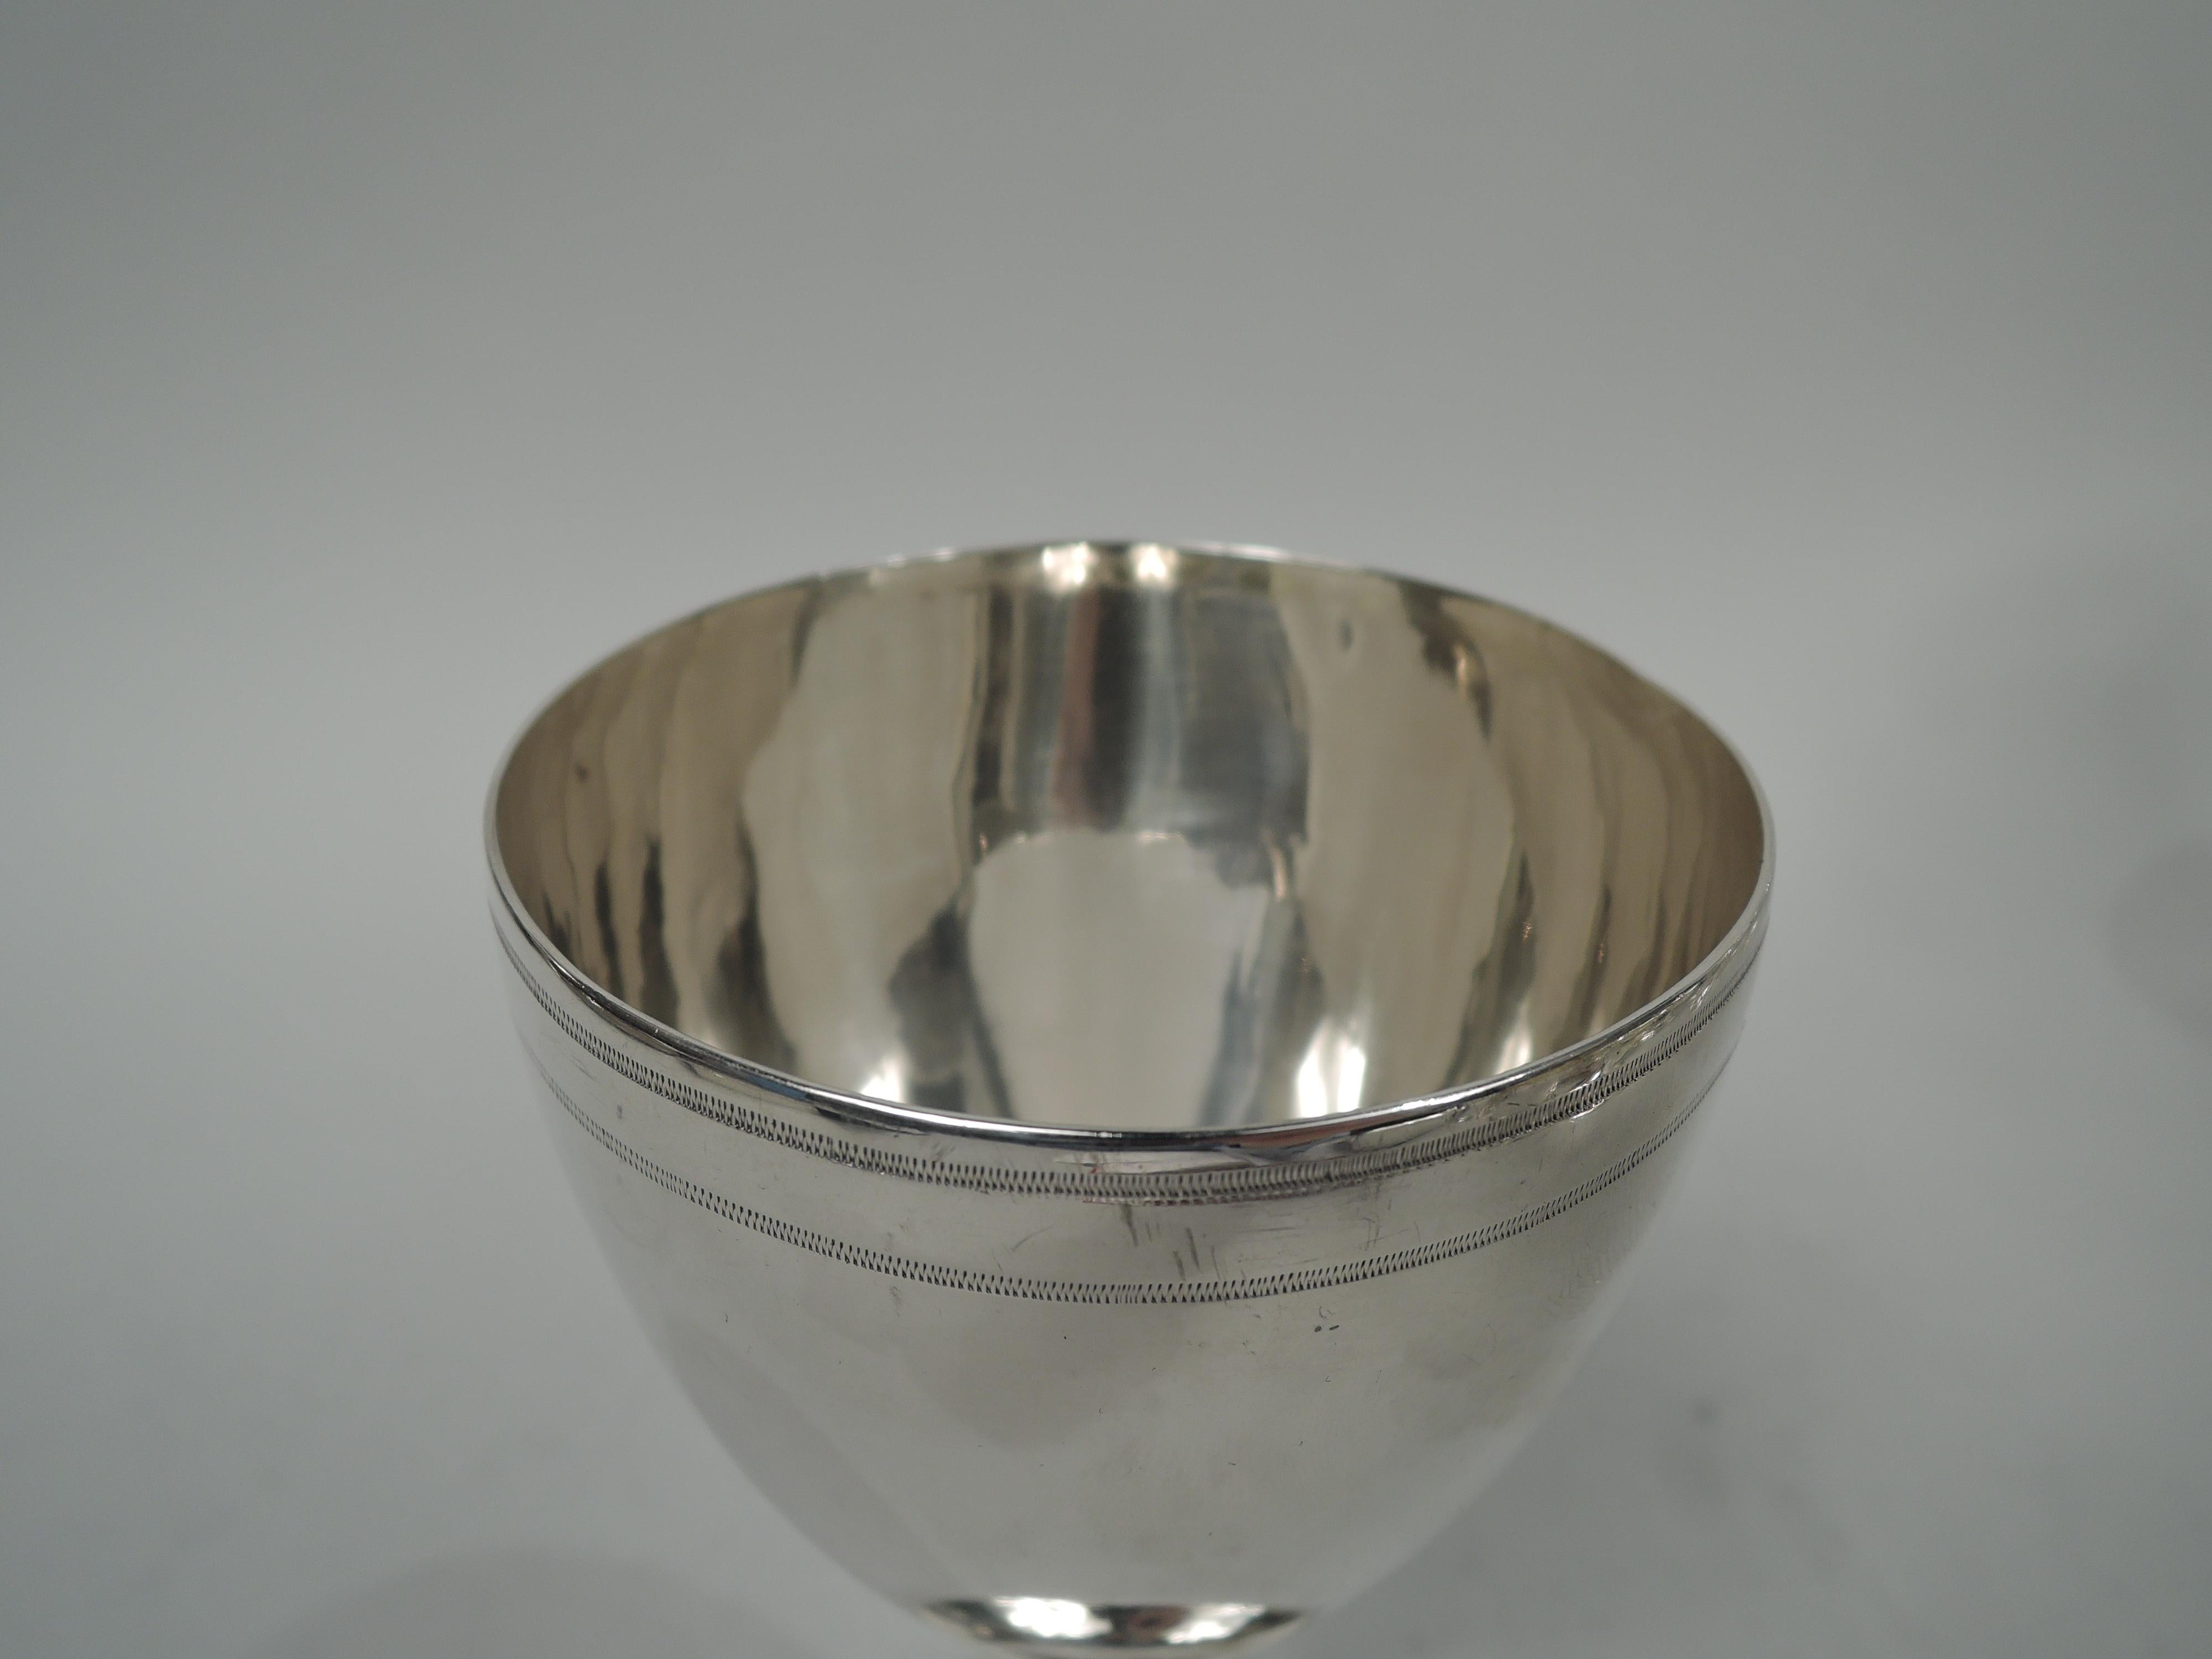 George III sterling silver goblet. Made by Hester Bateman in London in 1785. Ovoid bowl on upward tapering stem flowing into raised foot. Beaded and zigzag borders. Spare Georgian Neoclassicism by a collectible maker. Fully marked. Weight: 5.7 troy